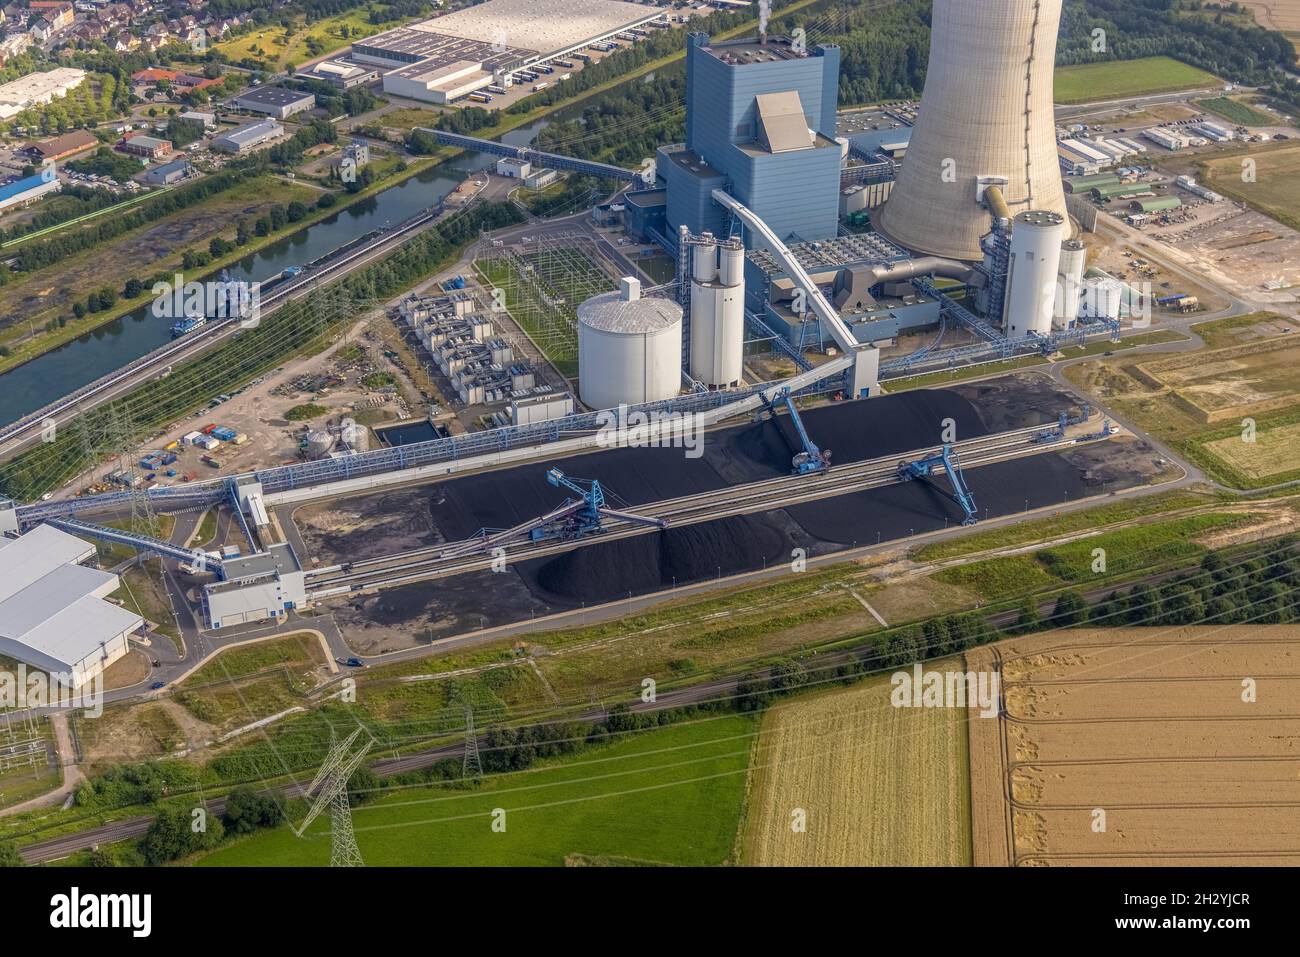 Aerial view of the power plant facilities and exhaust towers of the coal-fired combined heat and power plant Datteln 4 Uniper Kraftwerk Im Löringhof a Stock Photo